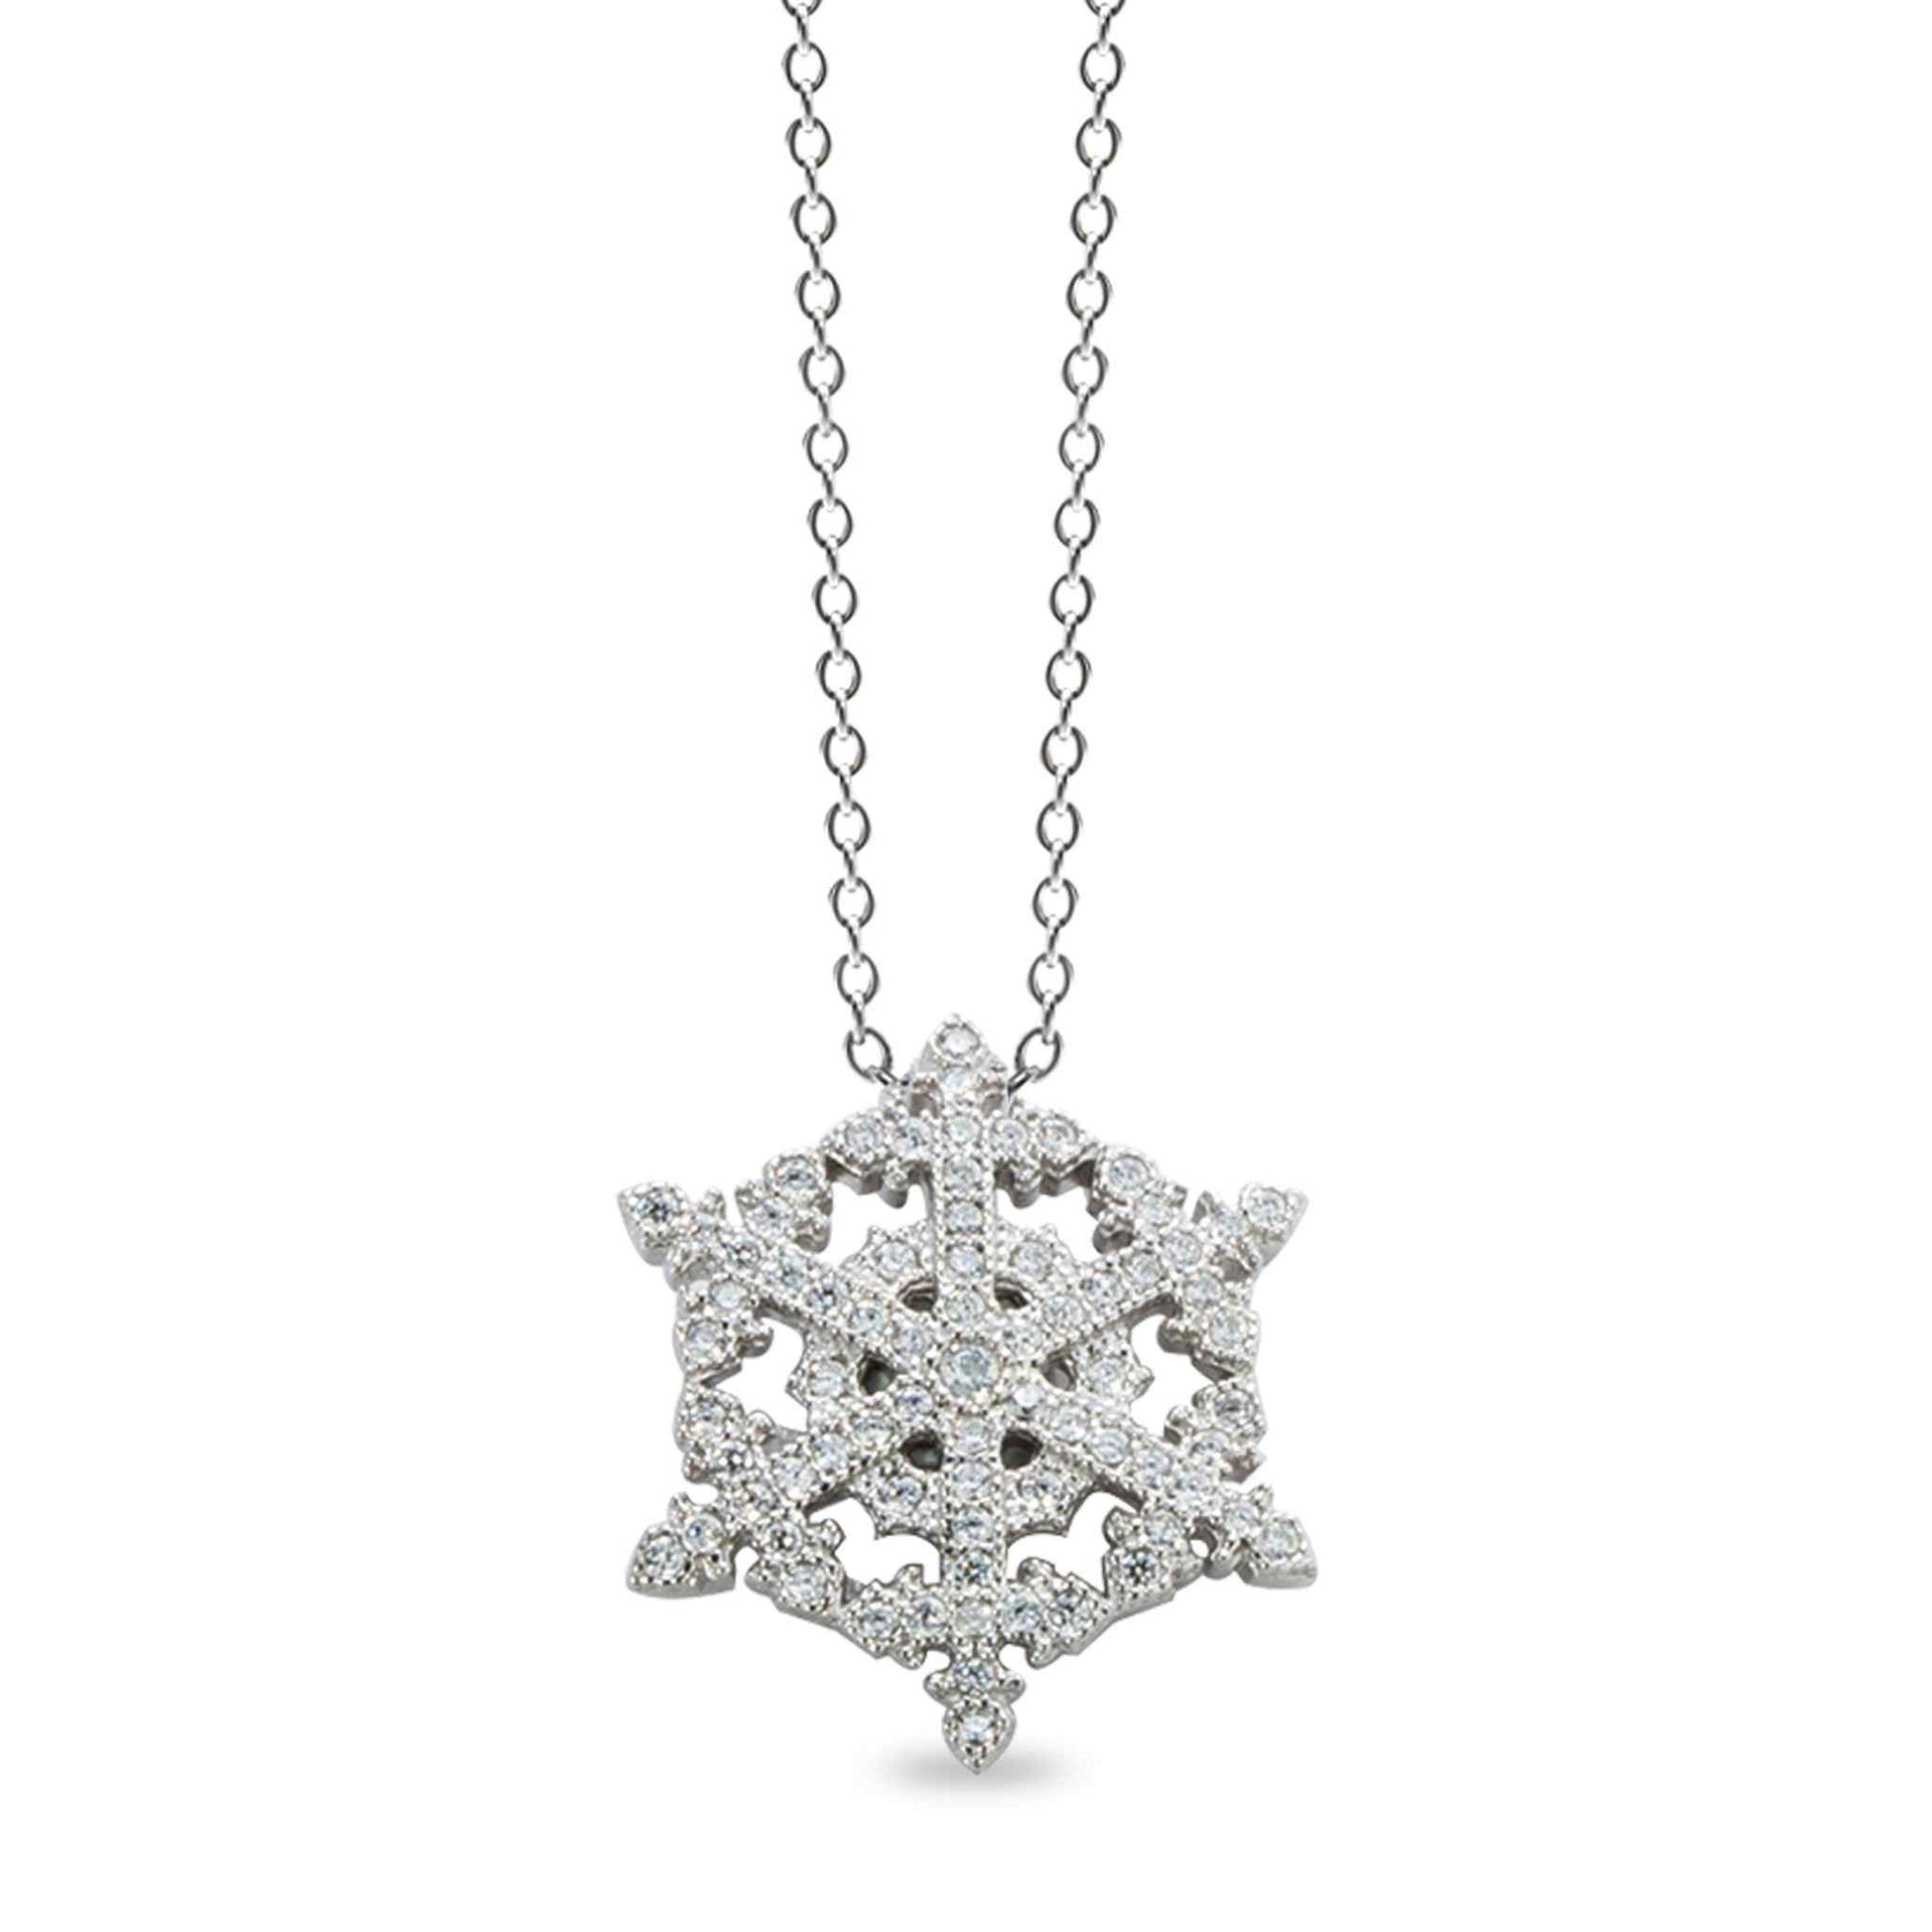 A small wheel shaped snowflake pendant with 73 simulated diamonds displayed on a neutral white background.